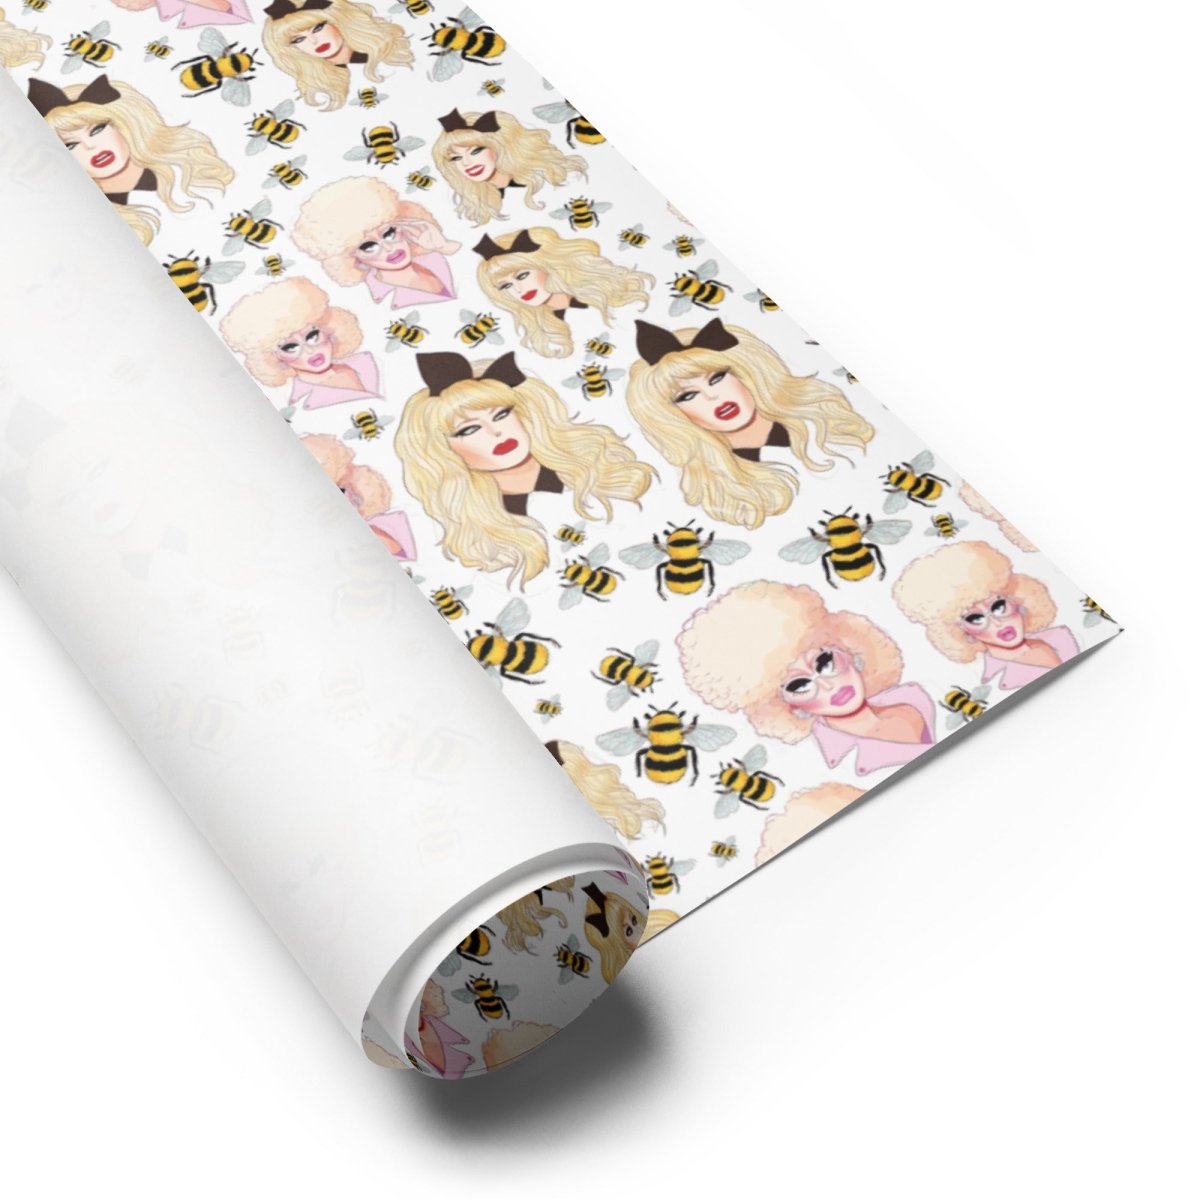 Trixie & Katya - Bees Wrapping paper sheets - dragqueenmerch